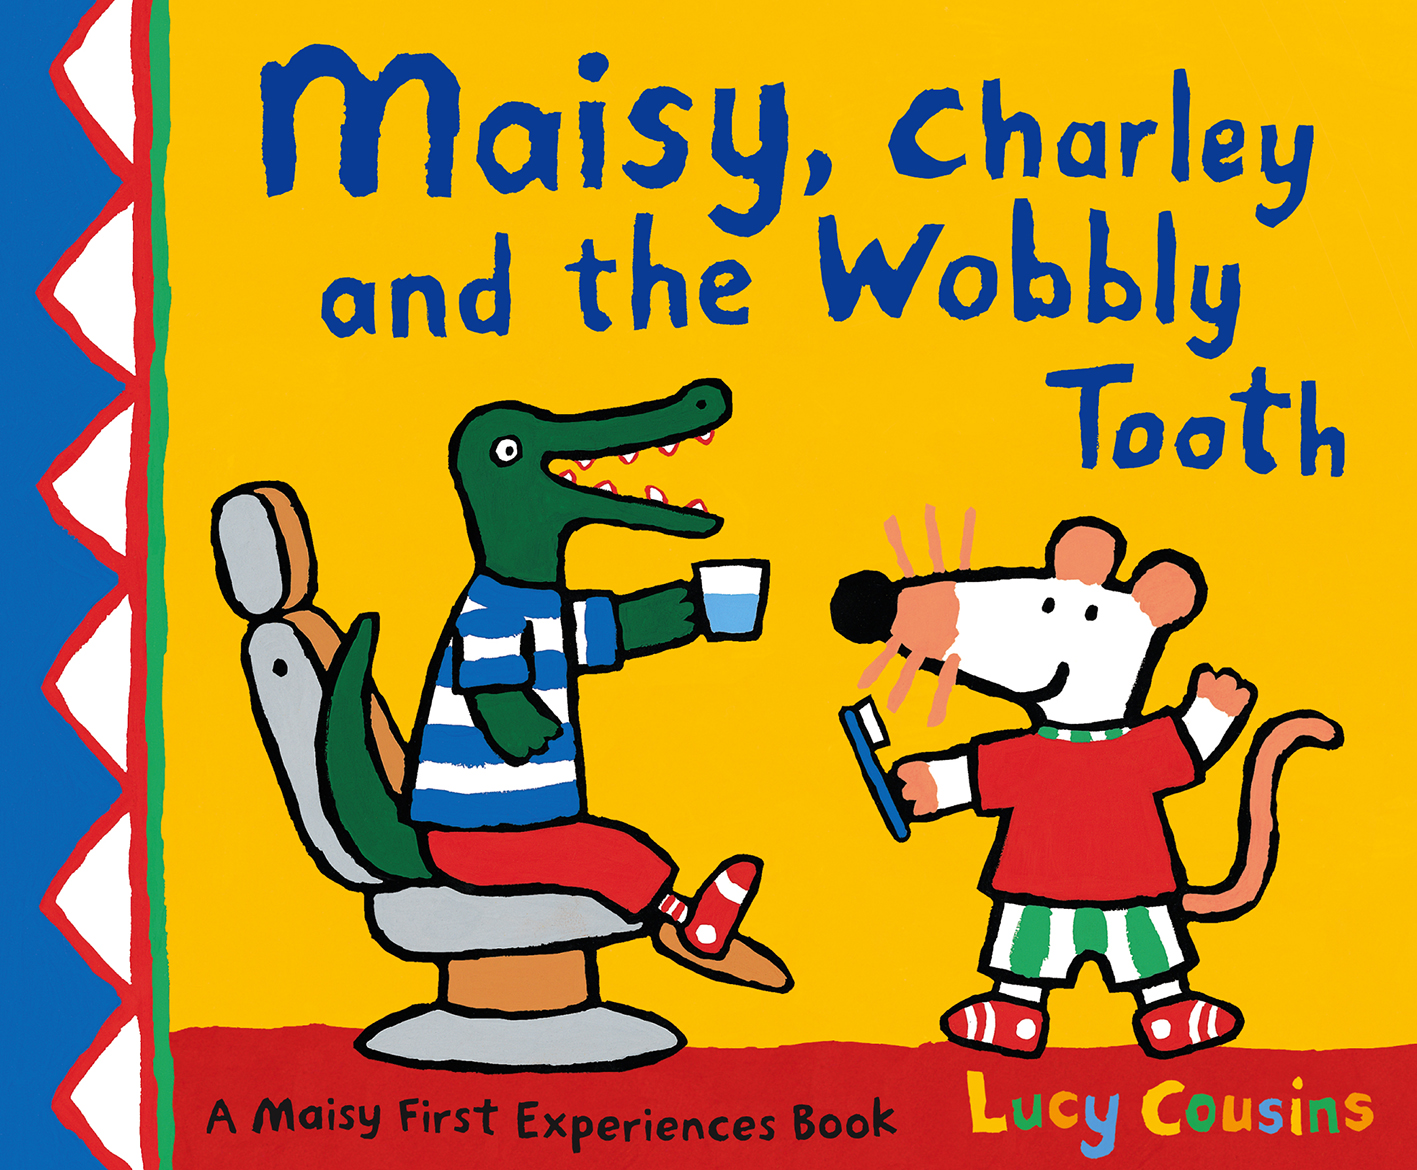 Maisy-Charley-and-the-Wobbly-Tooth